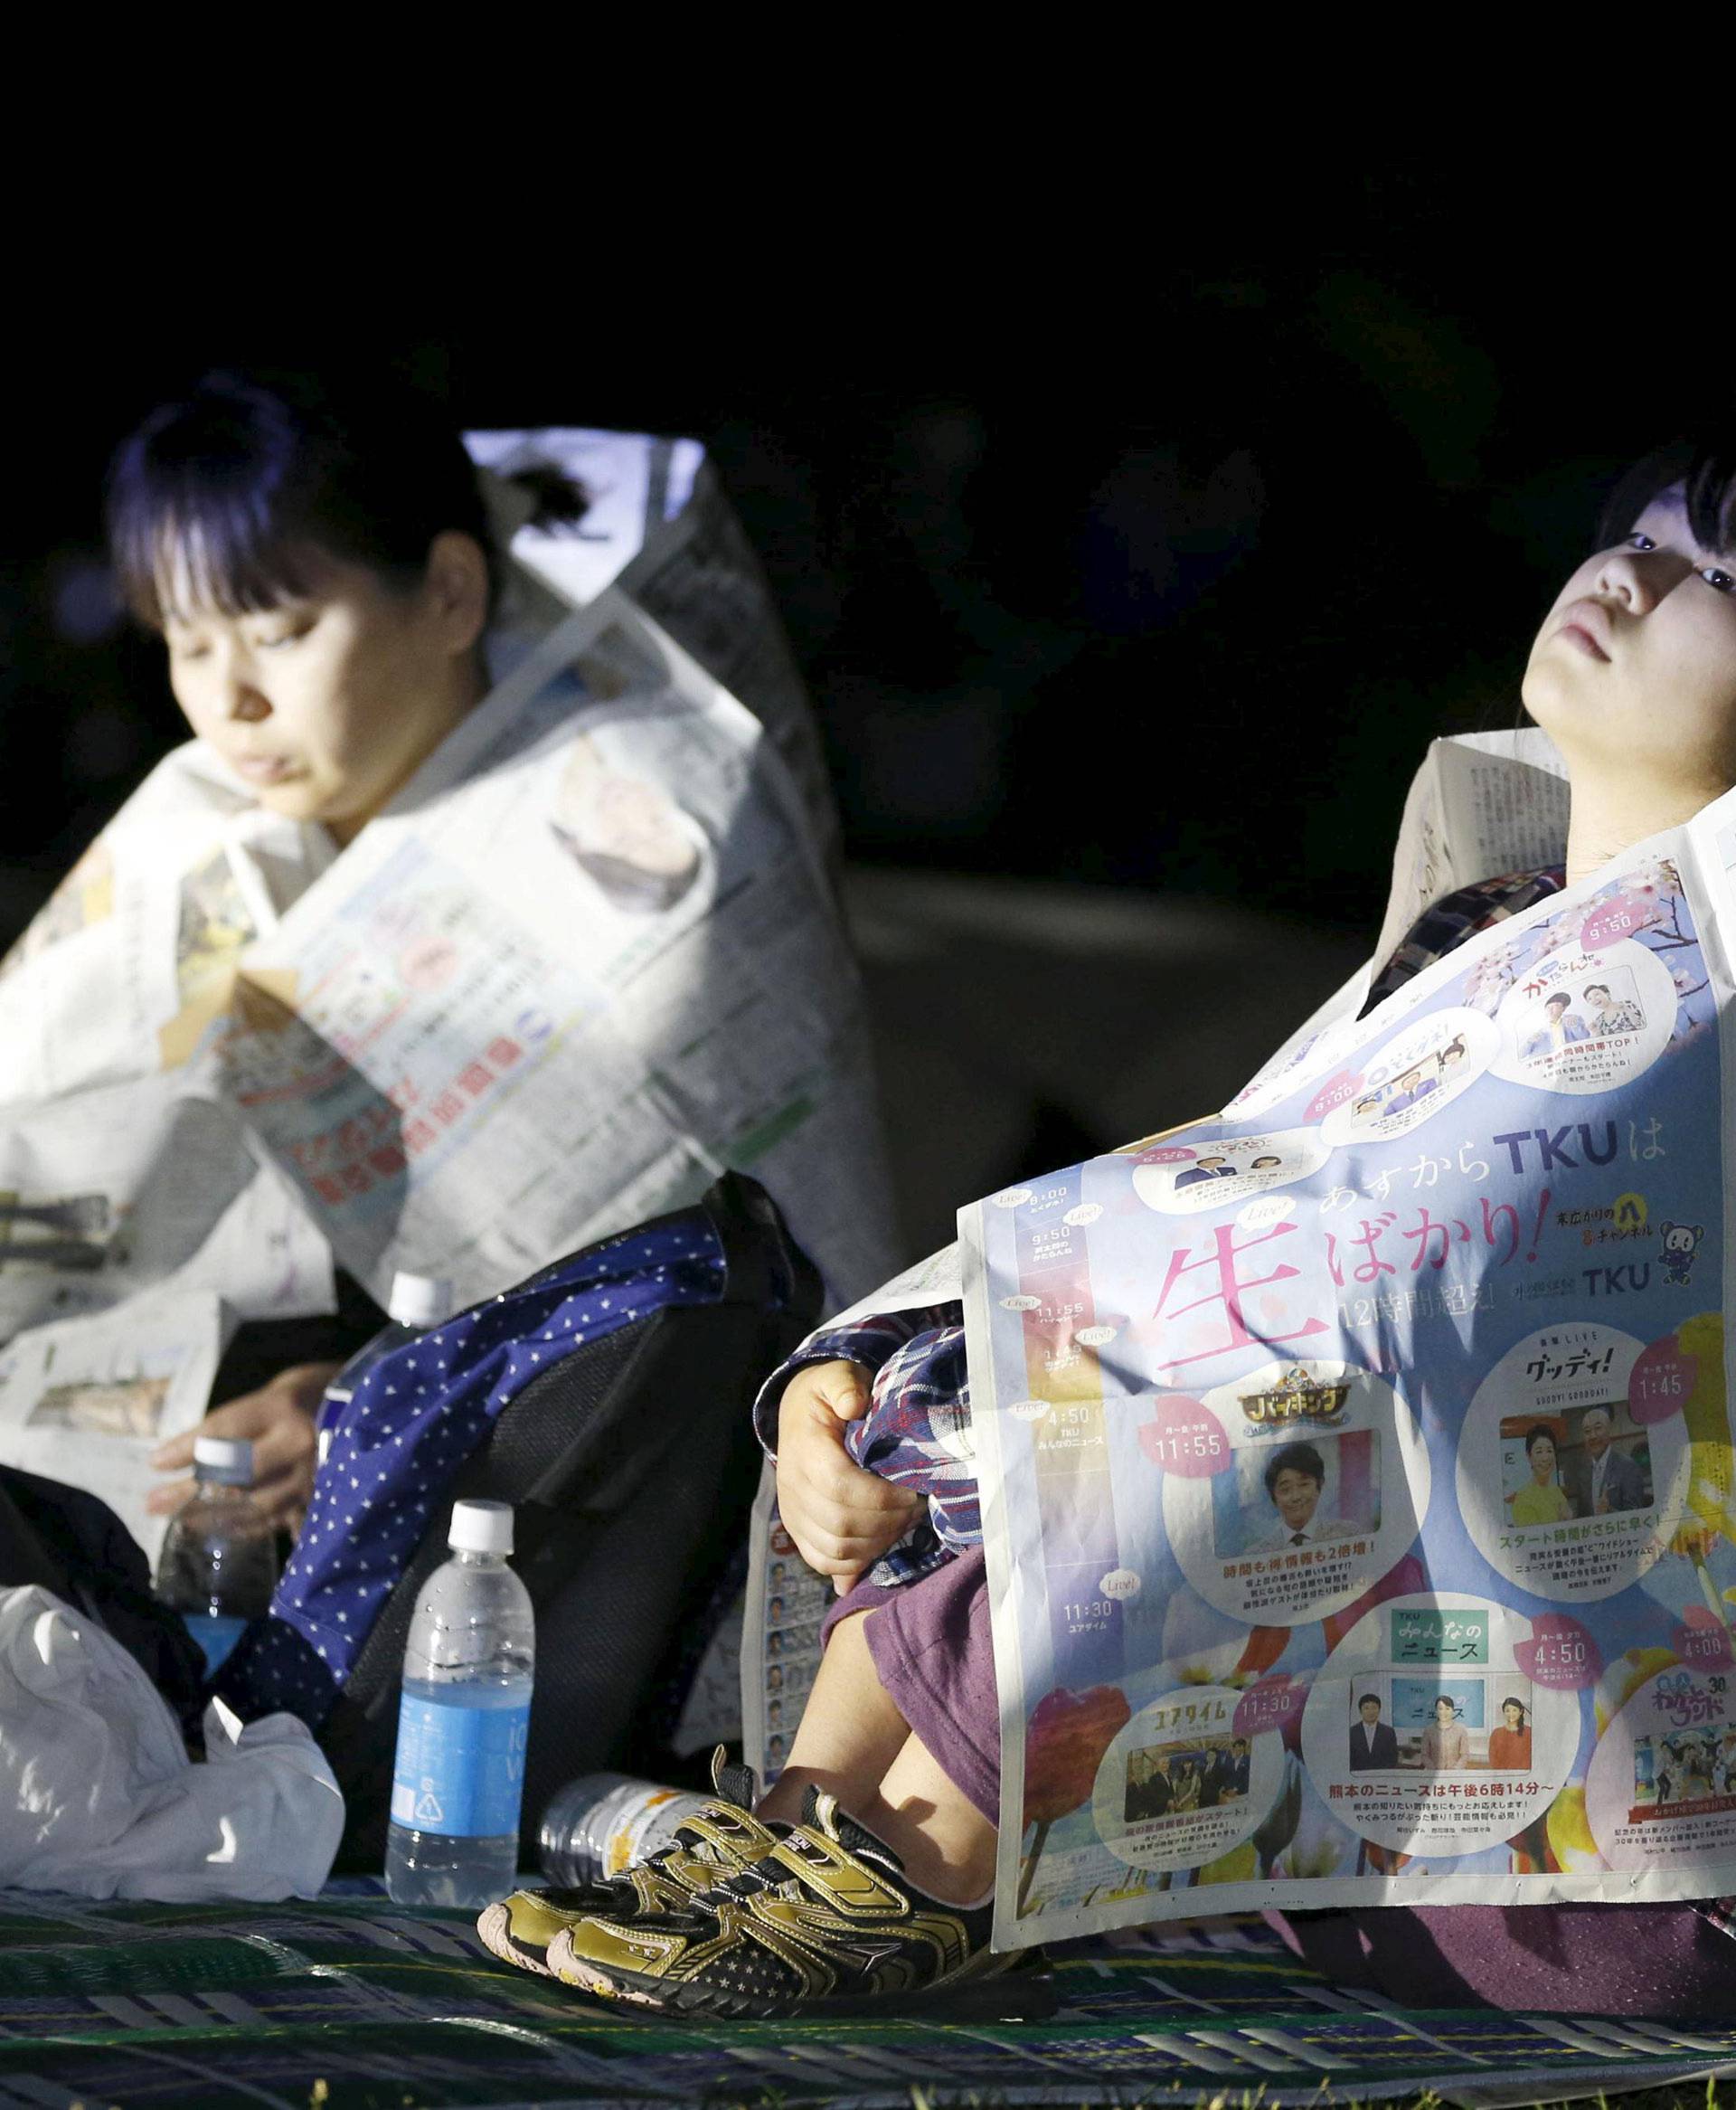 Evacuees use newspapers to warm themselves at Prefectural University of Kumamoto after an earthquake in Kumamoto, southern Japan